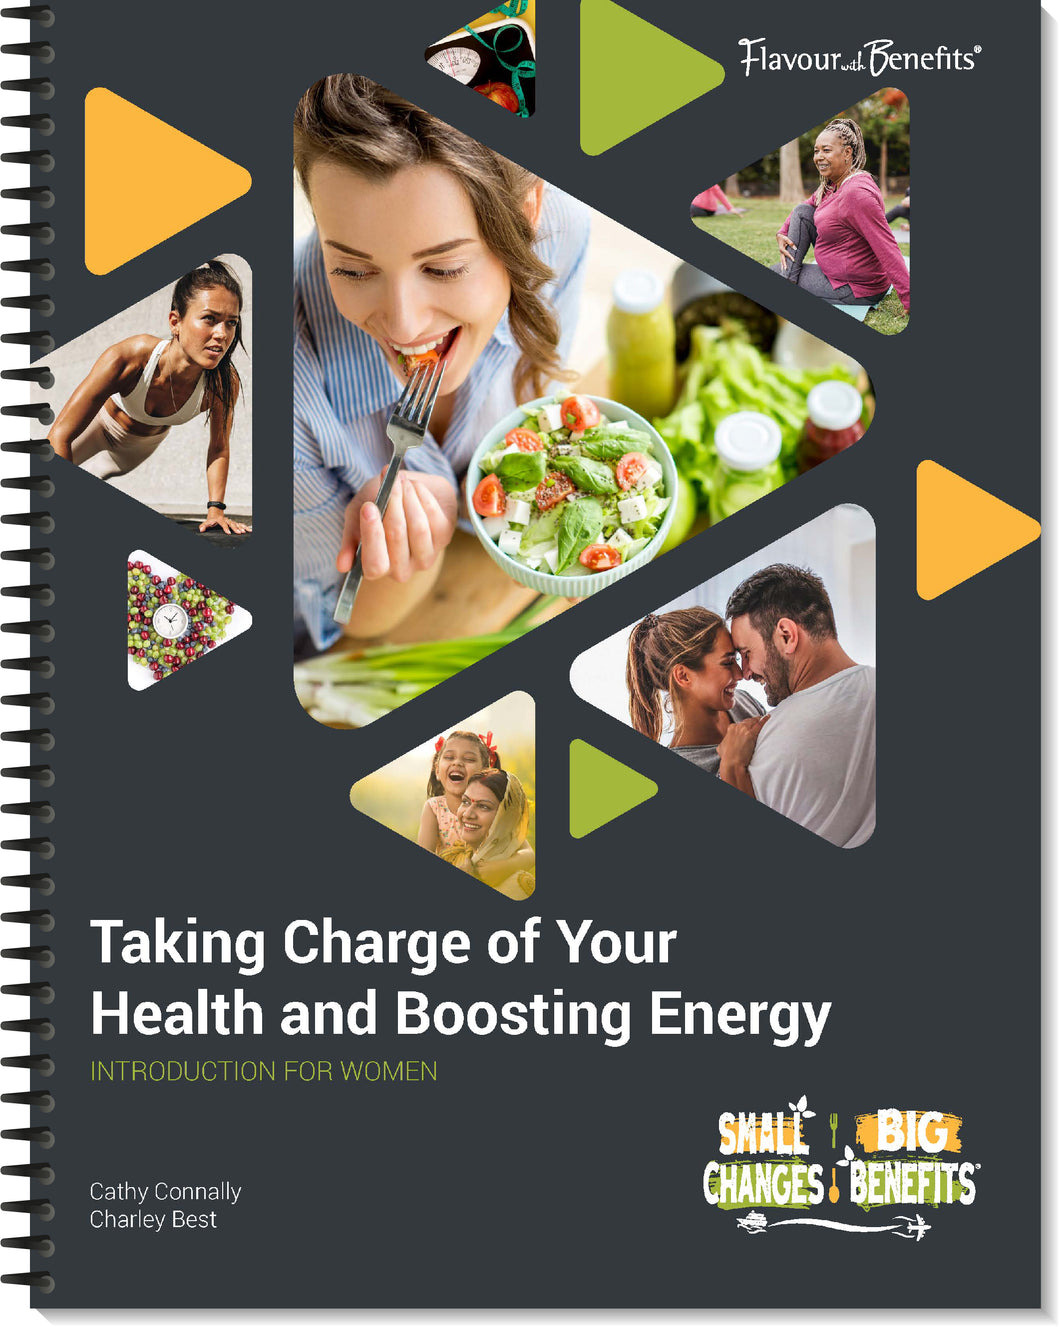 Small Changes Big Benefits - Taking Charge of your Health & Boosting Energy, Introduction for Women, Wire bound book